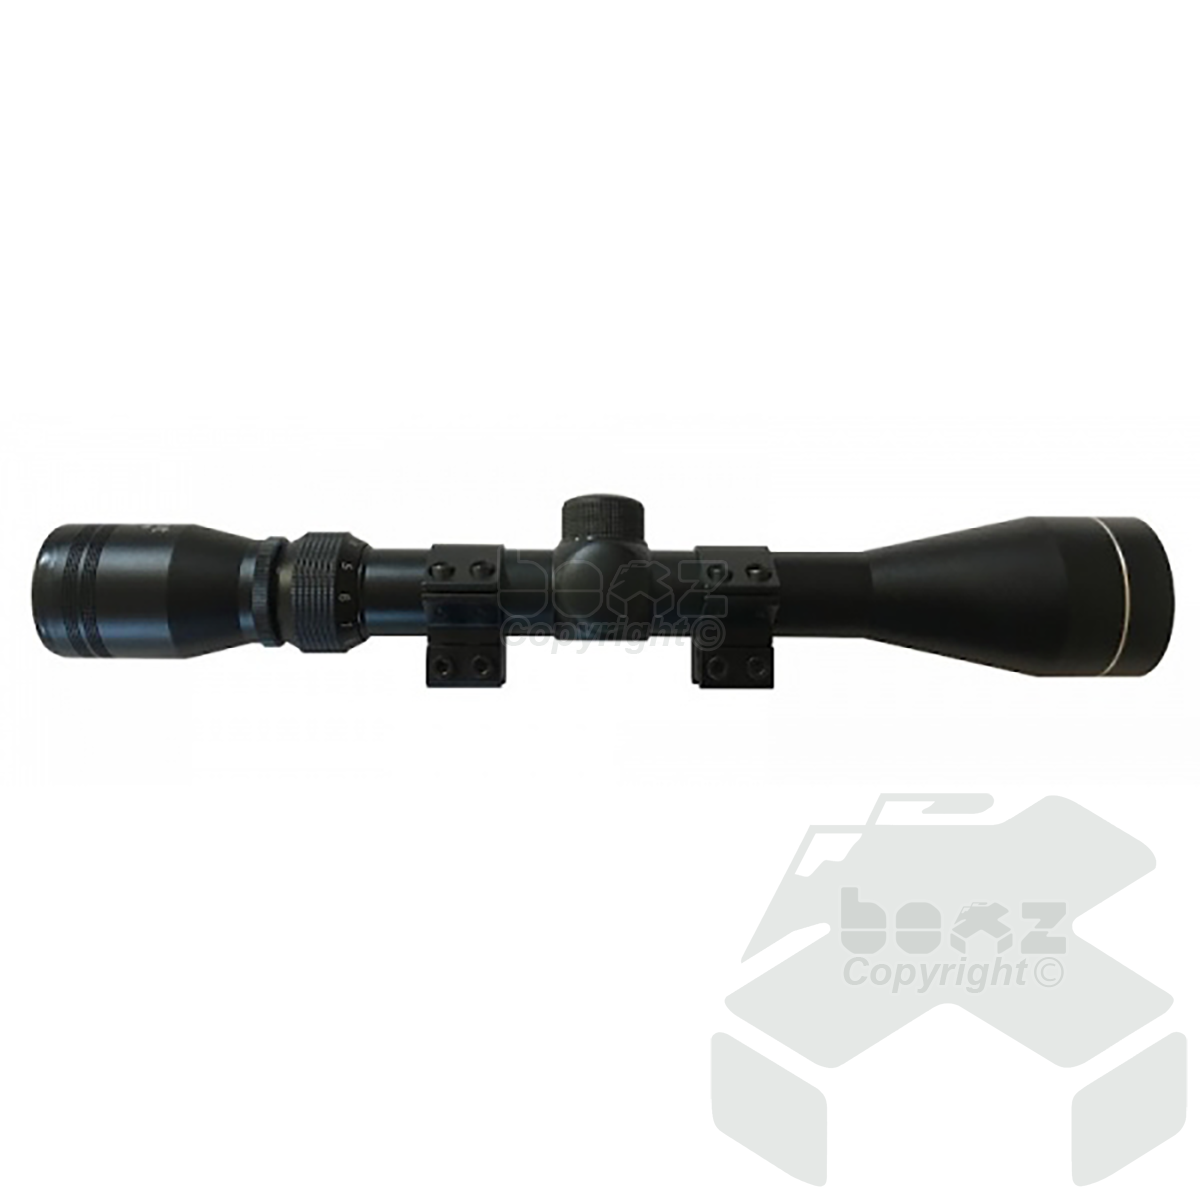 Proshot Precision 3-9x40 Scope with Two-piece Mounts